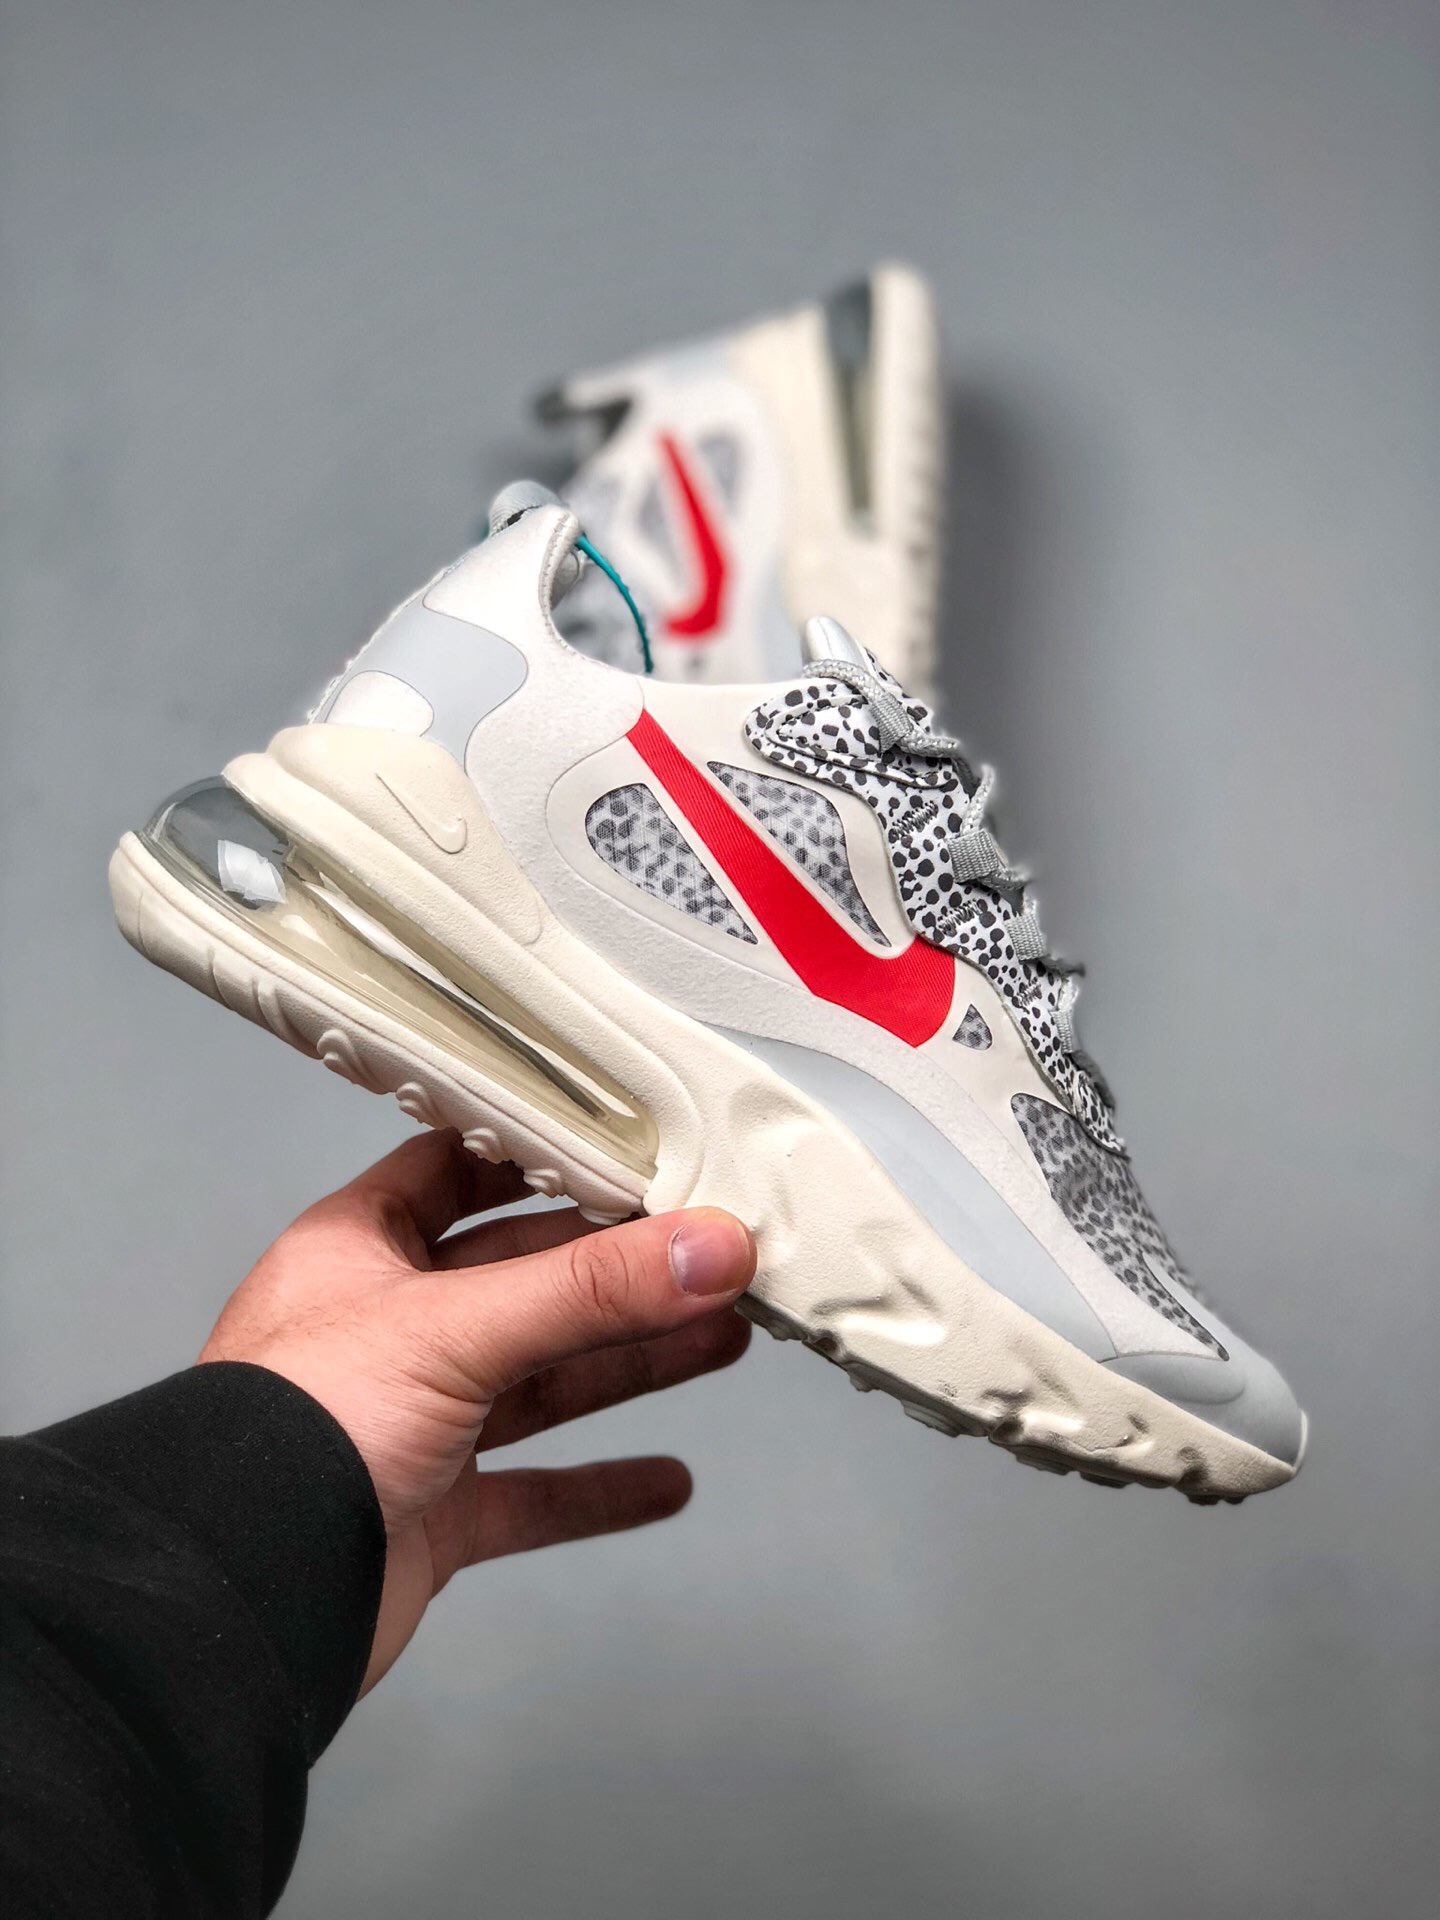 Whose Will rush Nike WMNS Air Max 270 React “Safari” White Red Grey For Sale – Sneaker Hello